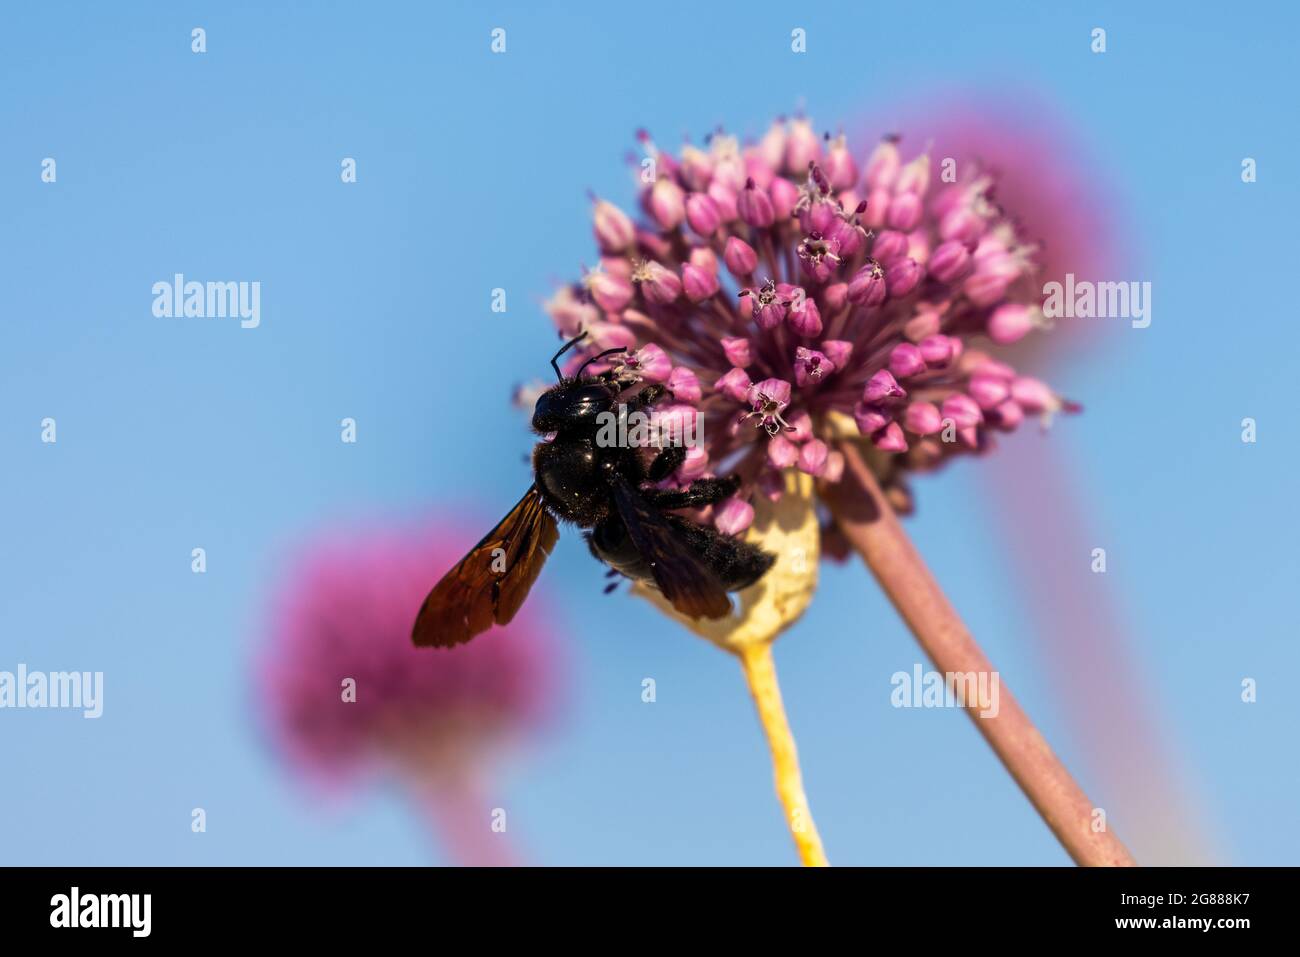 Xylocopa violacea, the violet carpenter bee on the onion plant Stock Photo